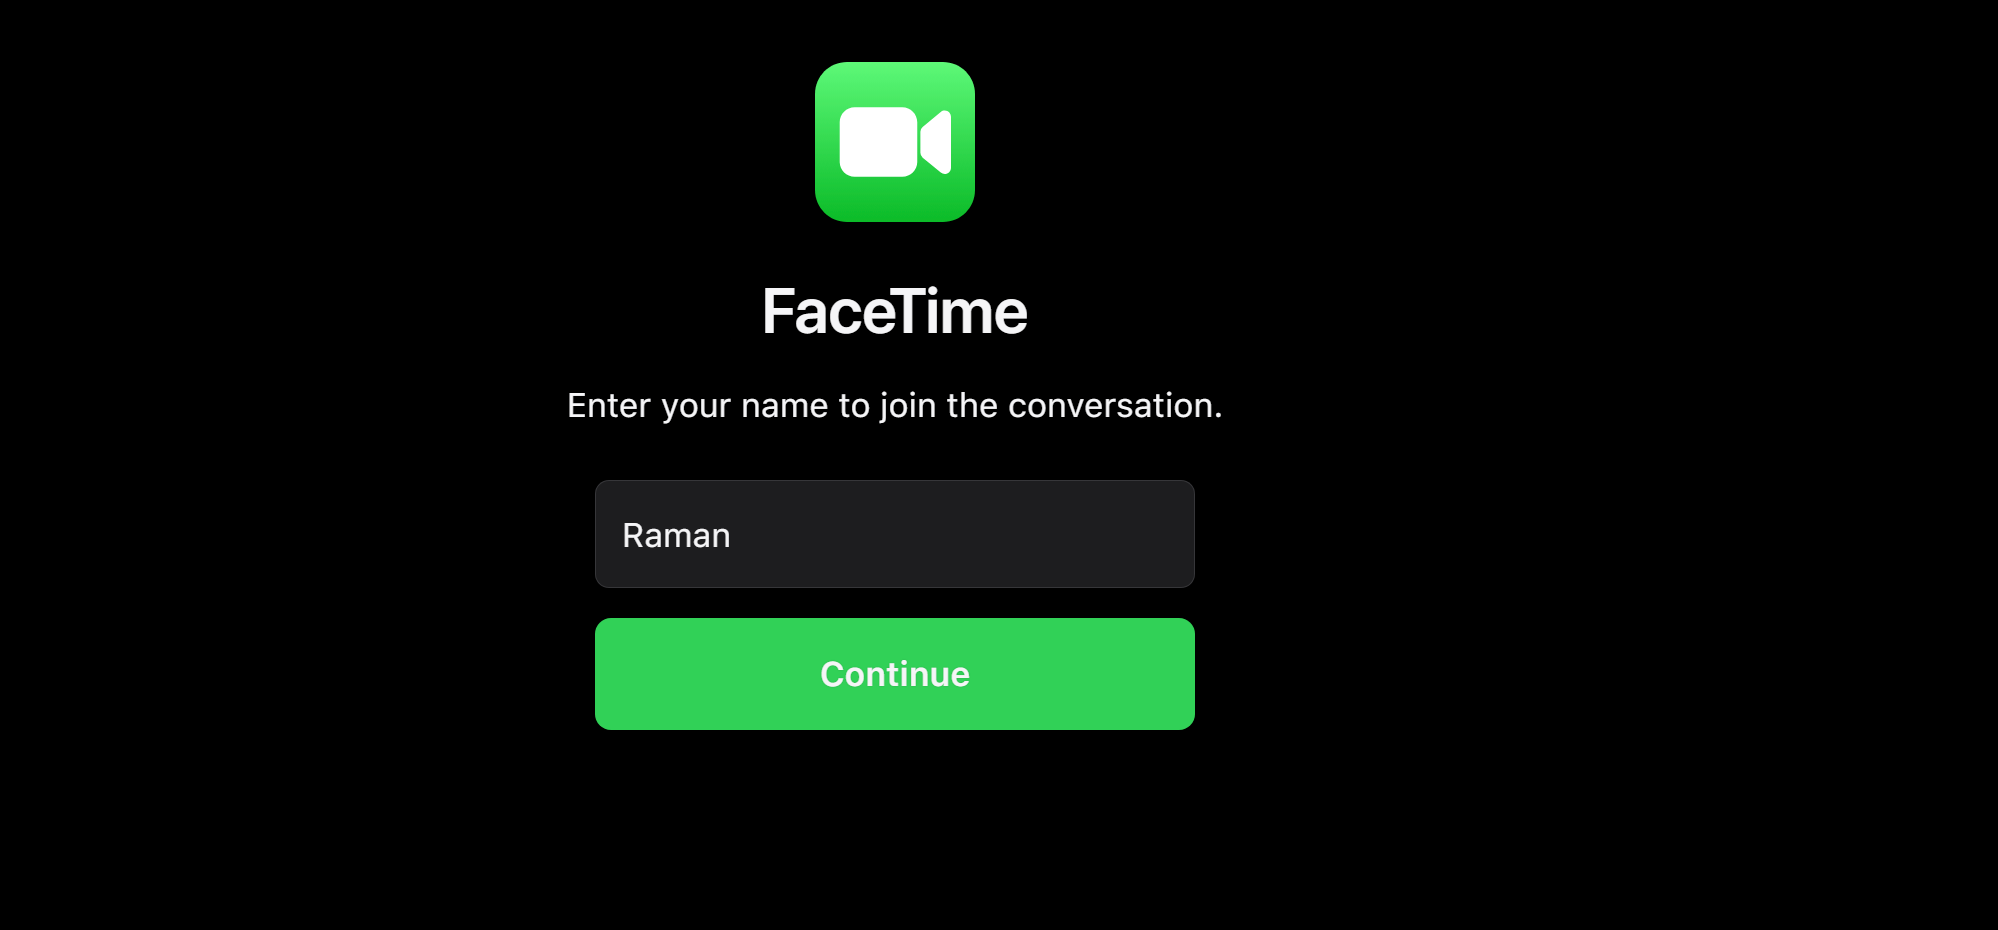 How to Use FaceTime for Windows: Easy Guide 10